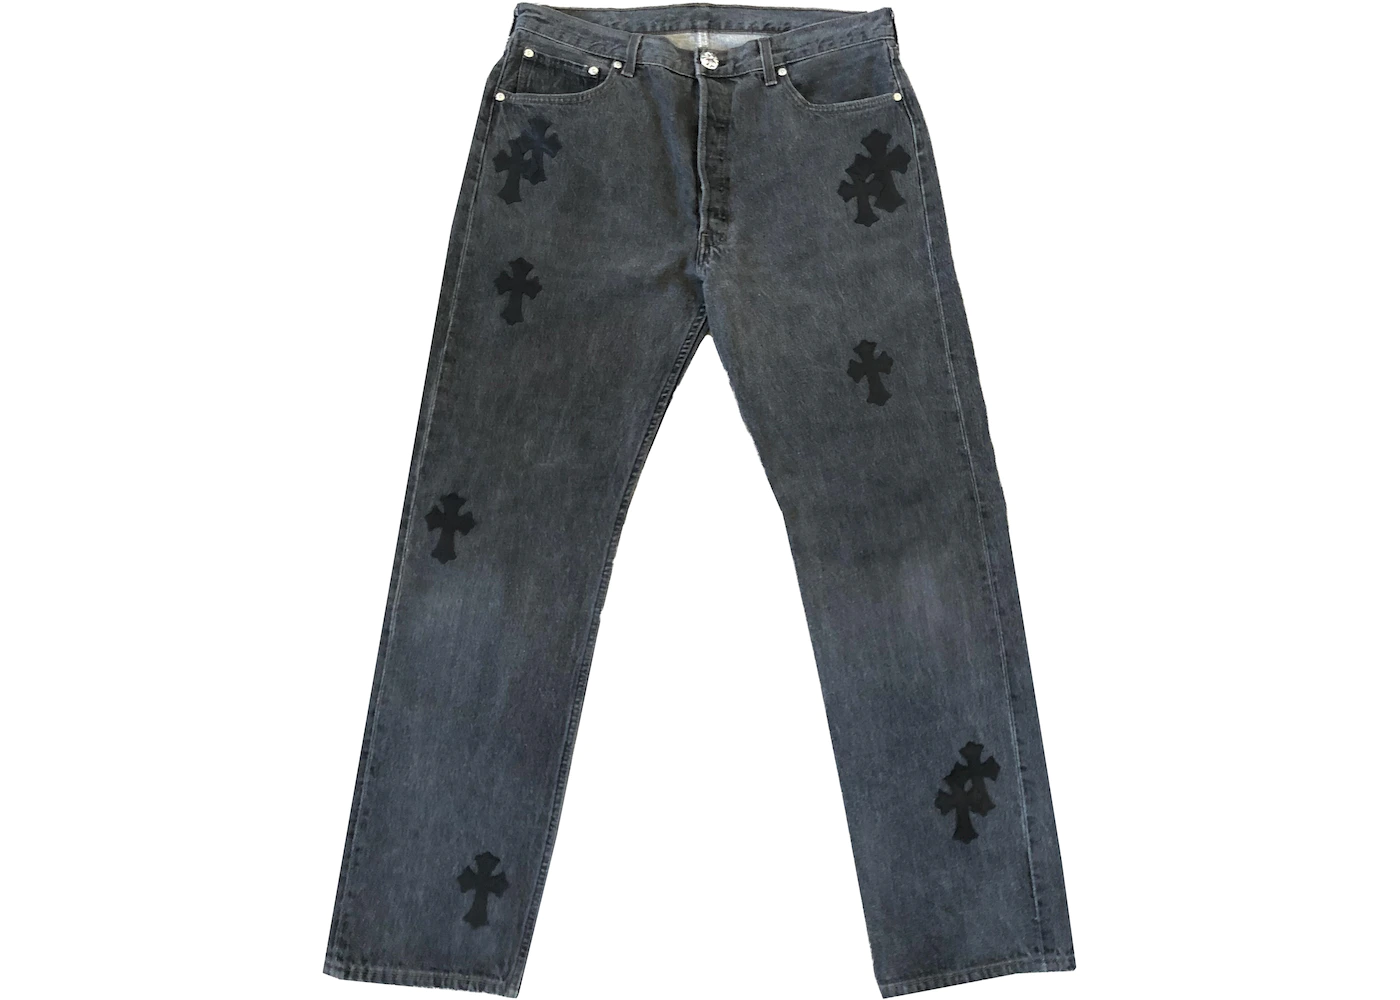 Who Owns Chrome Hearts Jeans